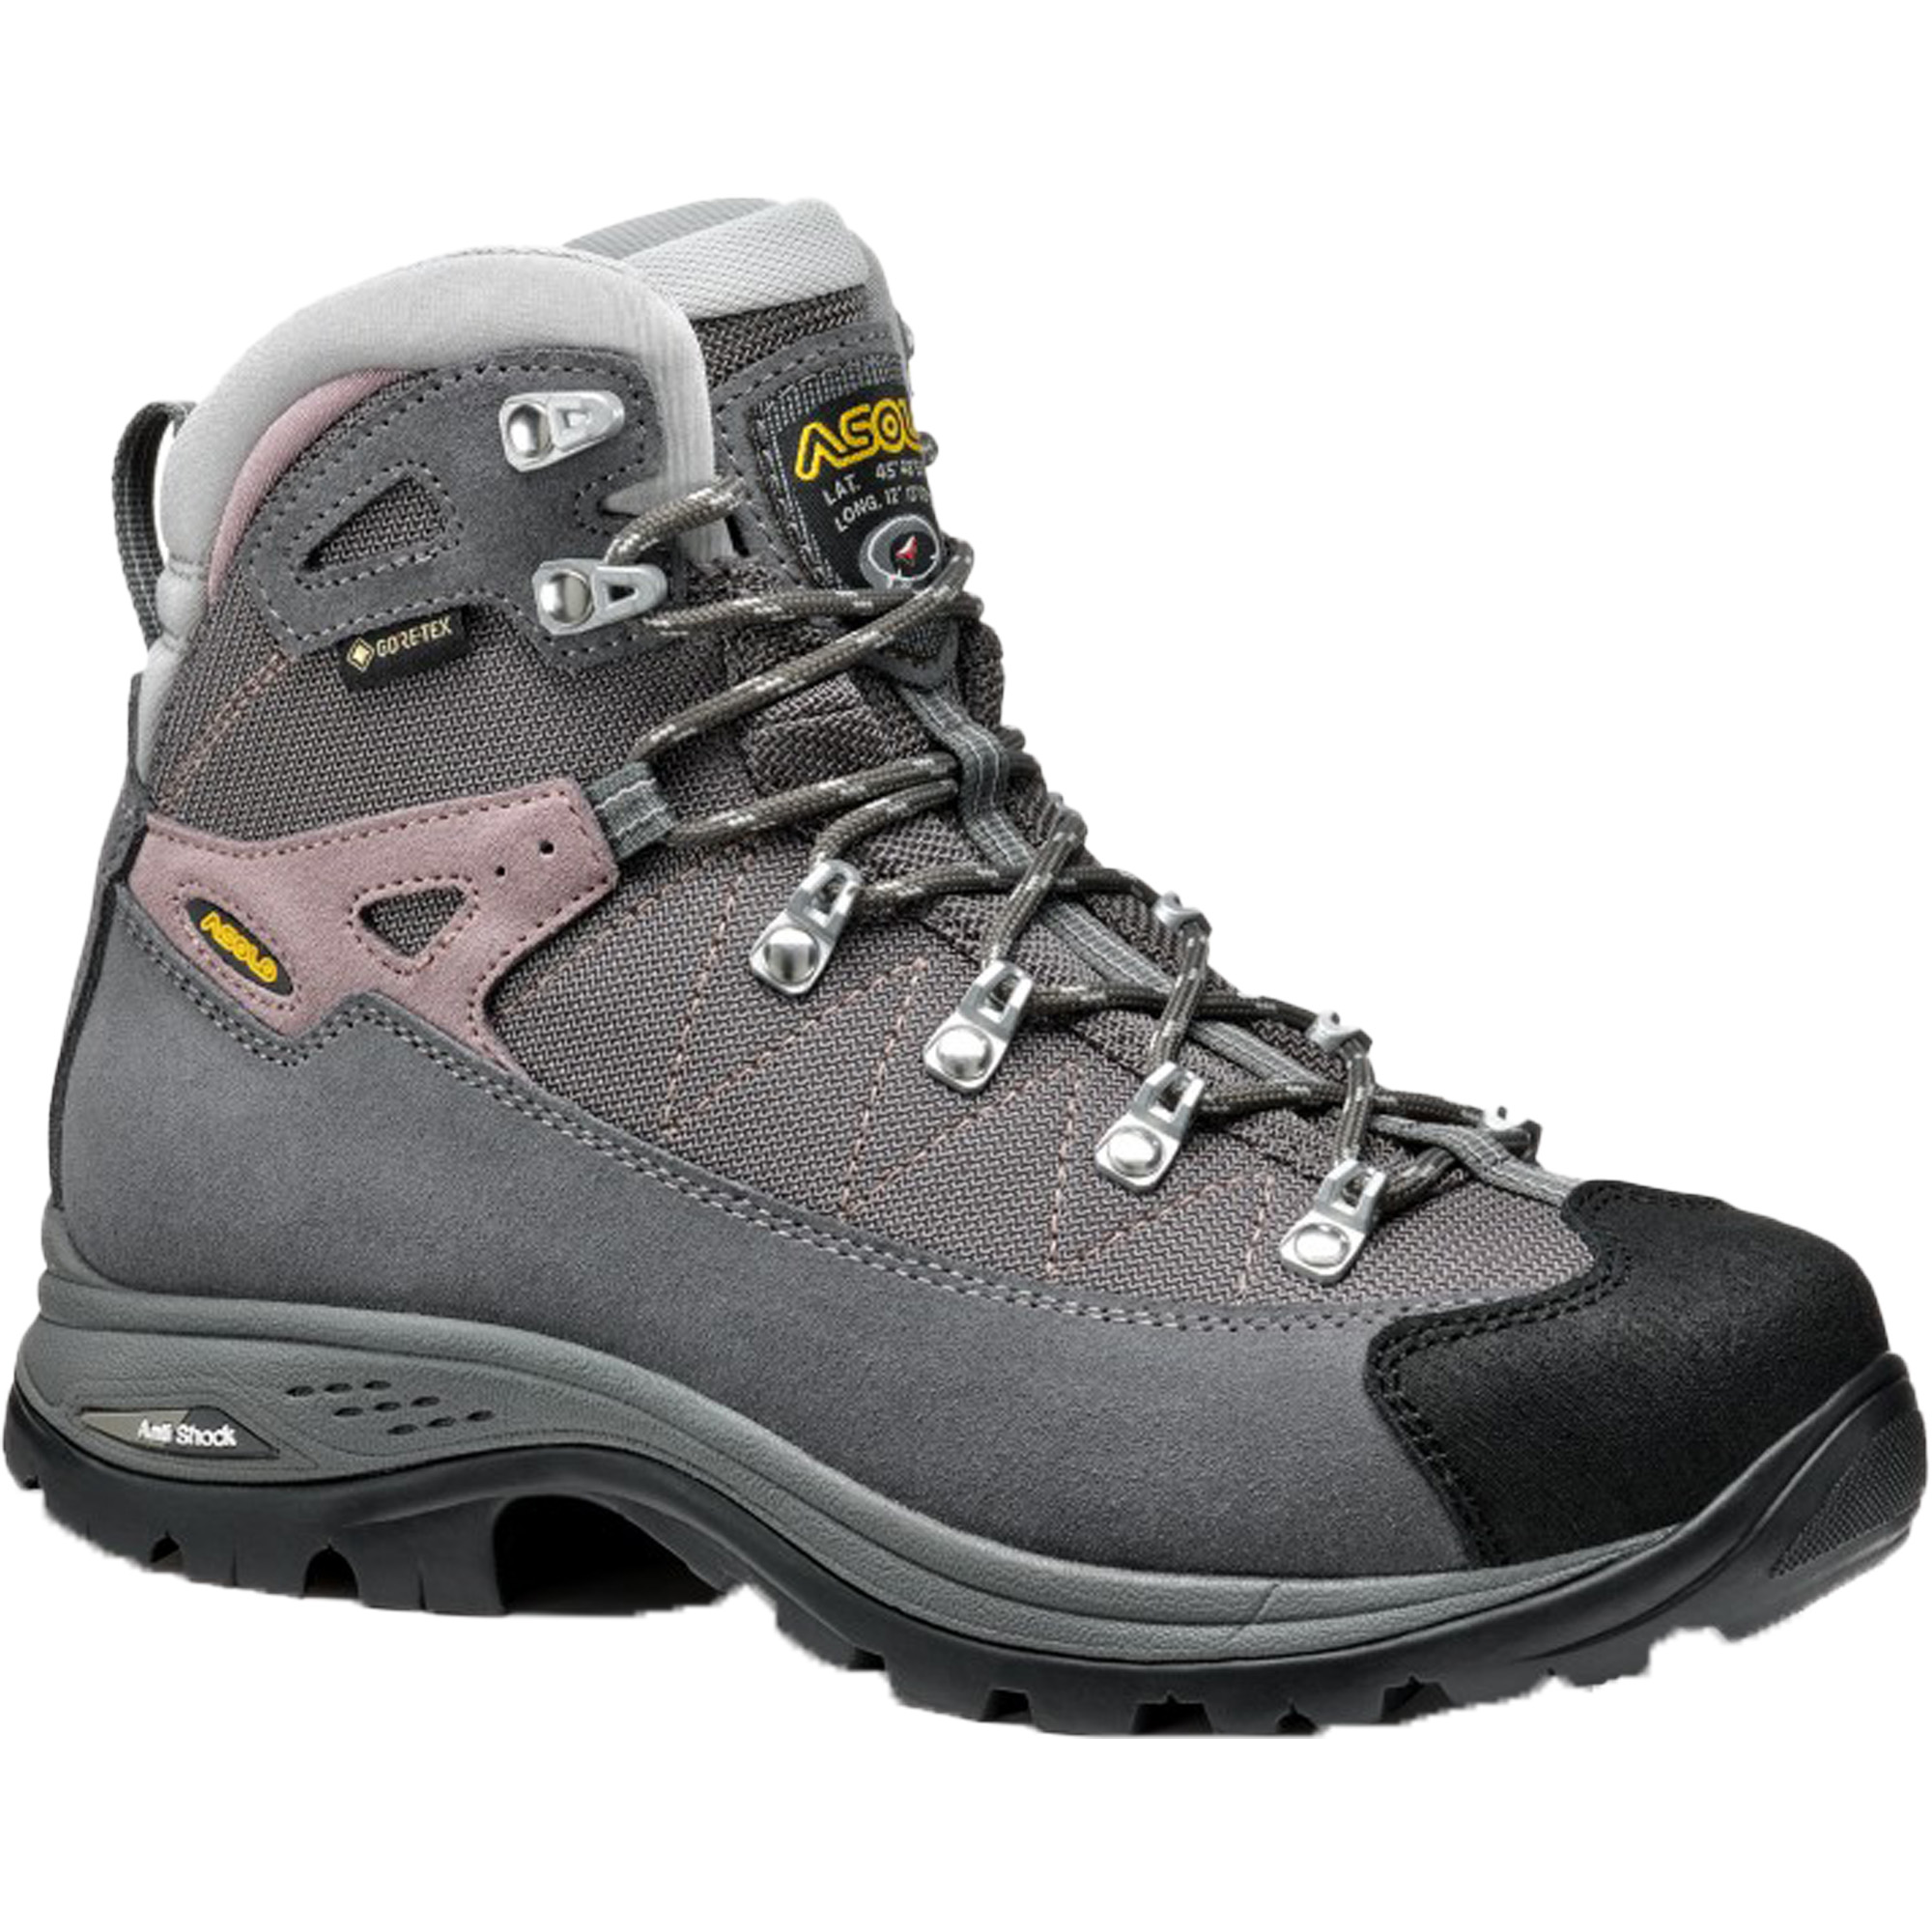 Asolo Finder GV Gore-tex Women%27s Hiking Boots, UK 6.5 Grey/Rose Taupe